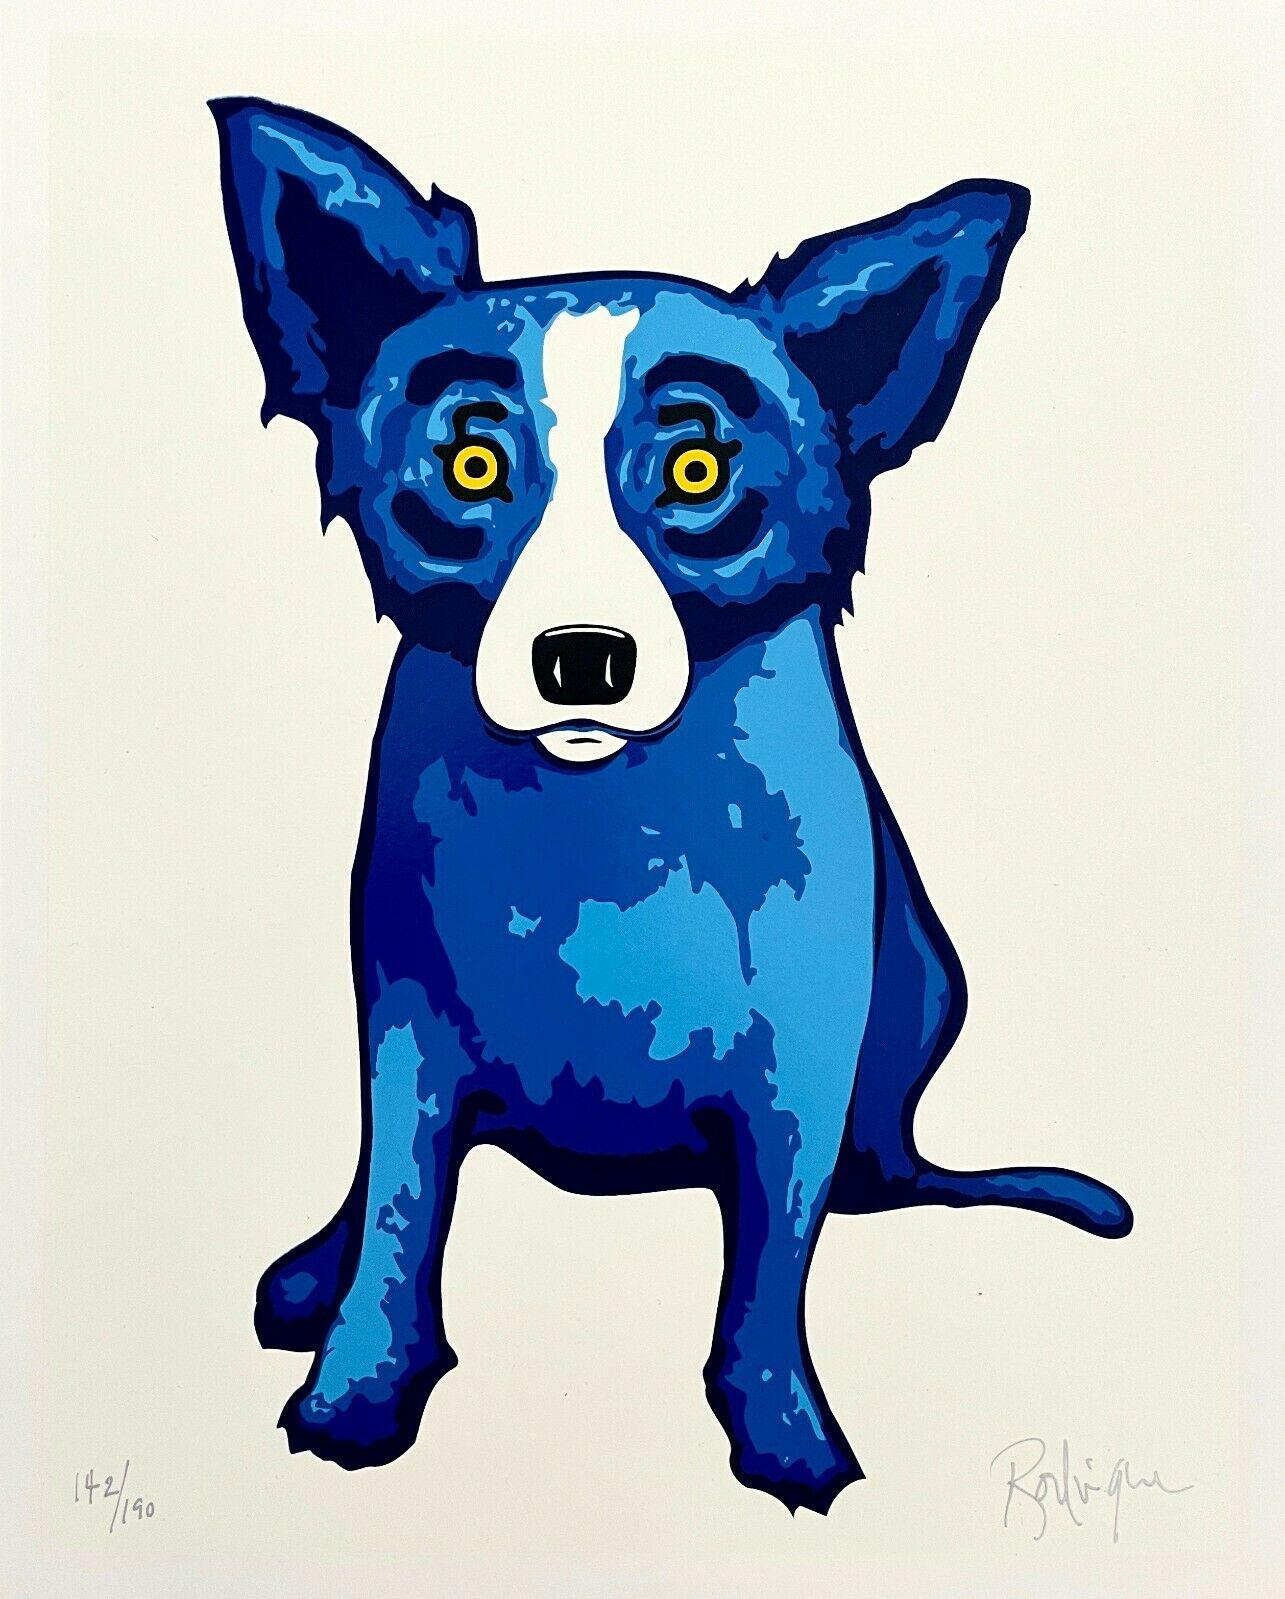 Artist: George Rodrigue (1944-2013)
Title: Purity of Soul (Blue Dog Series)
Year: 2005
Edition: 190, plus proofs
Medium: Silkscreen on archival paper
Size: 15 x 12 inches
Condition: Excellent
Inscription: Signed and numbered by the artist.

GEORGE